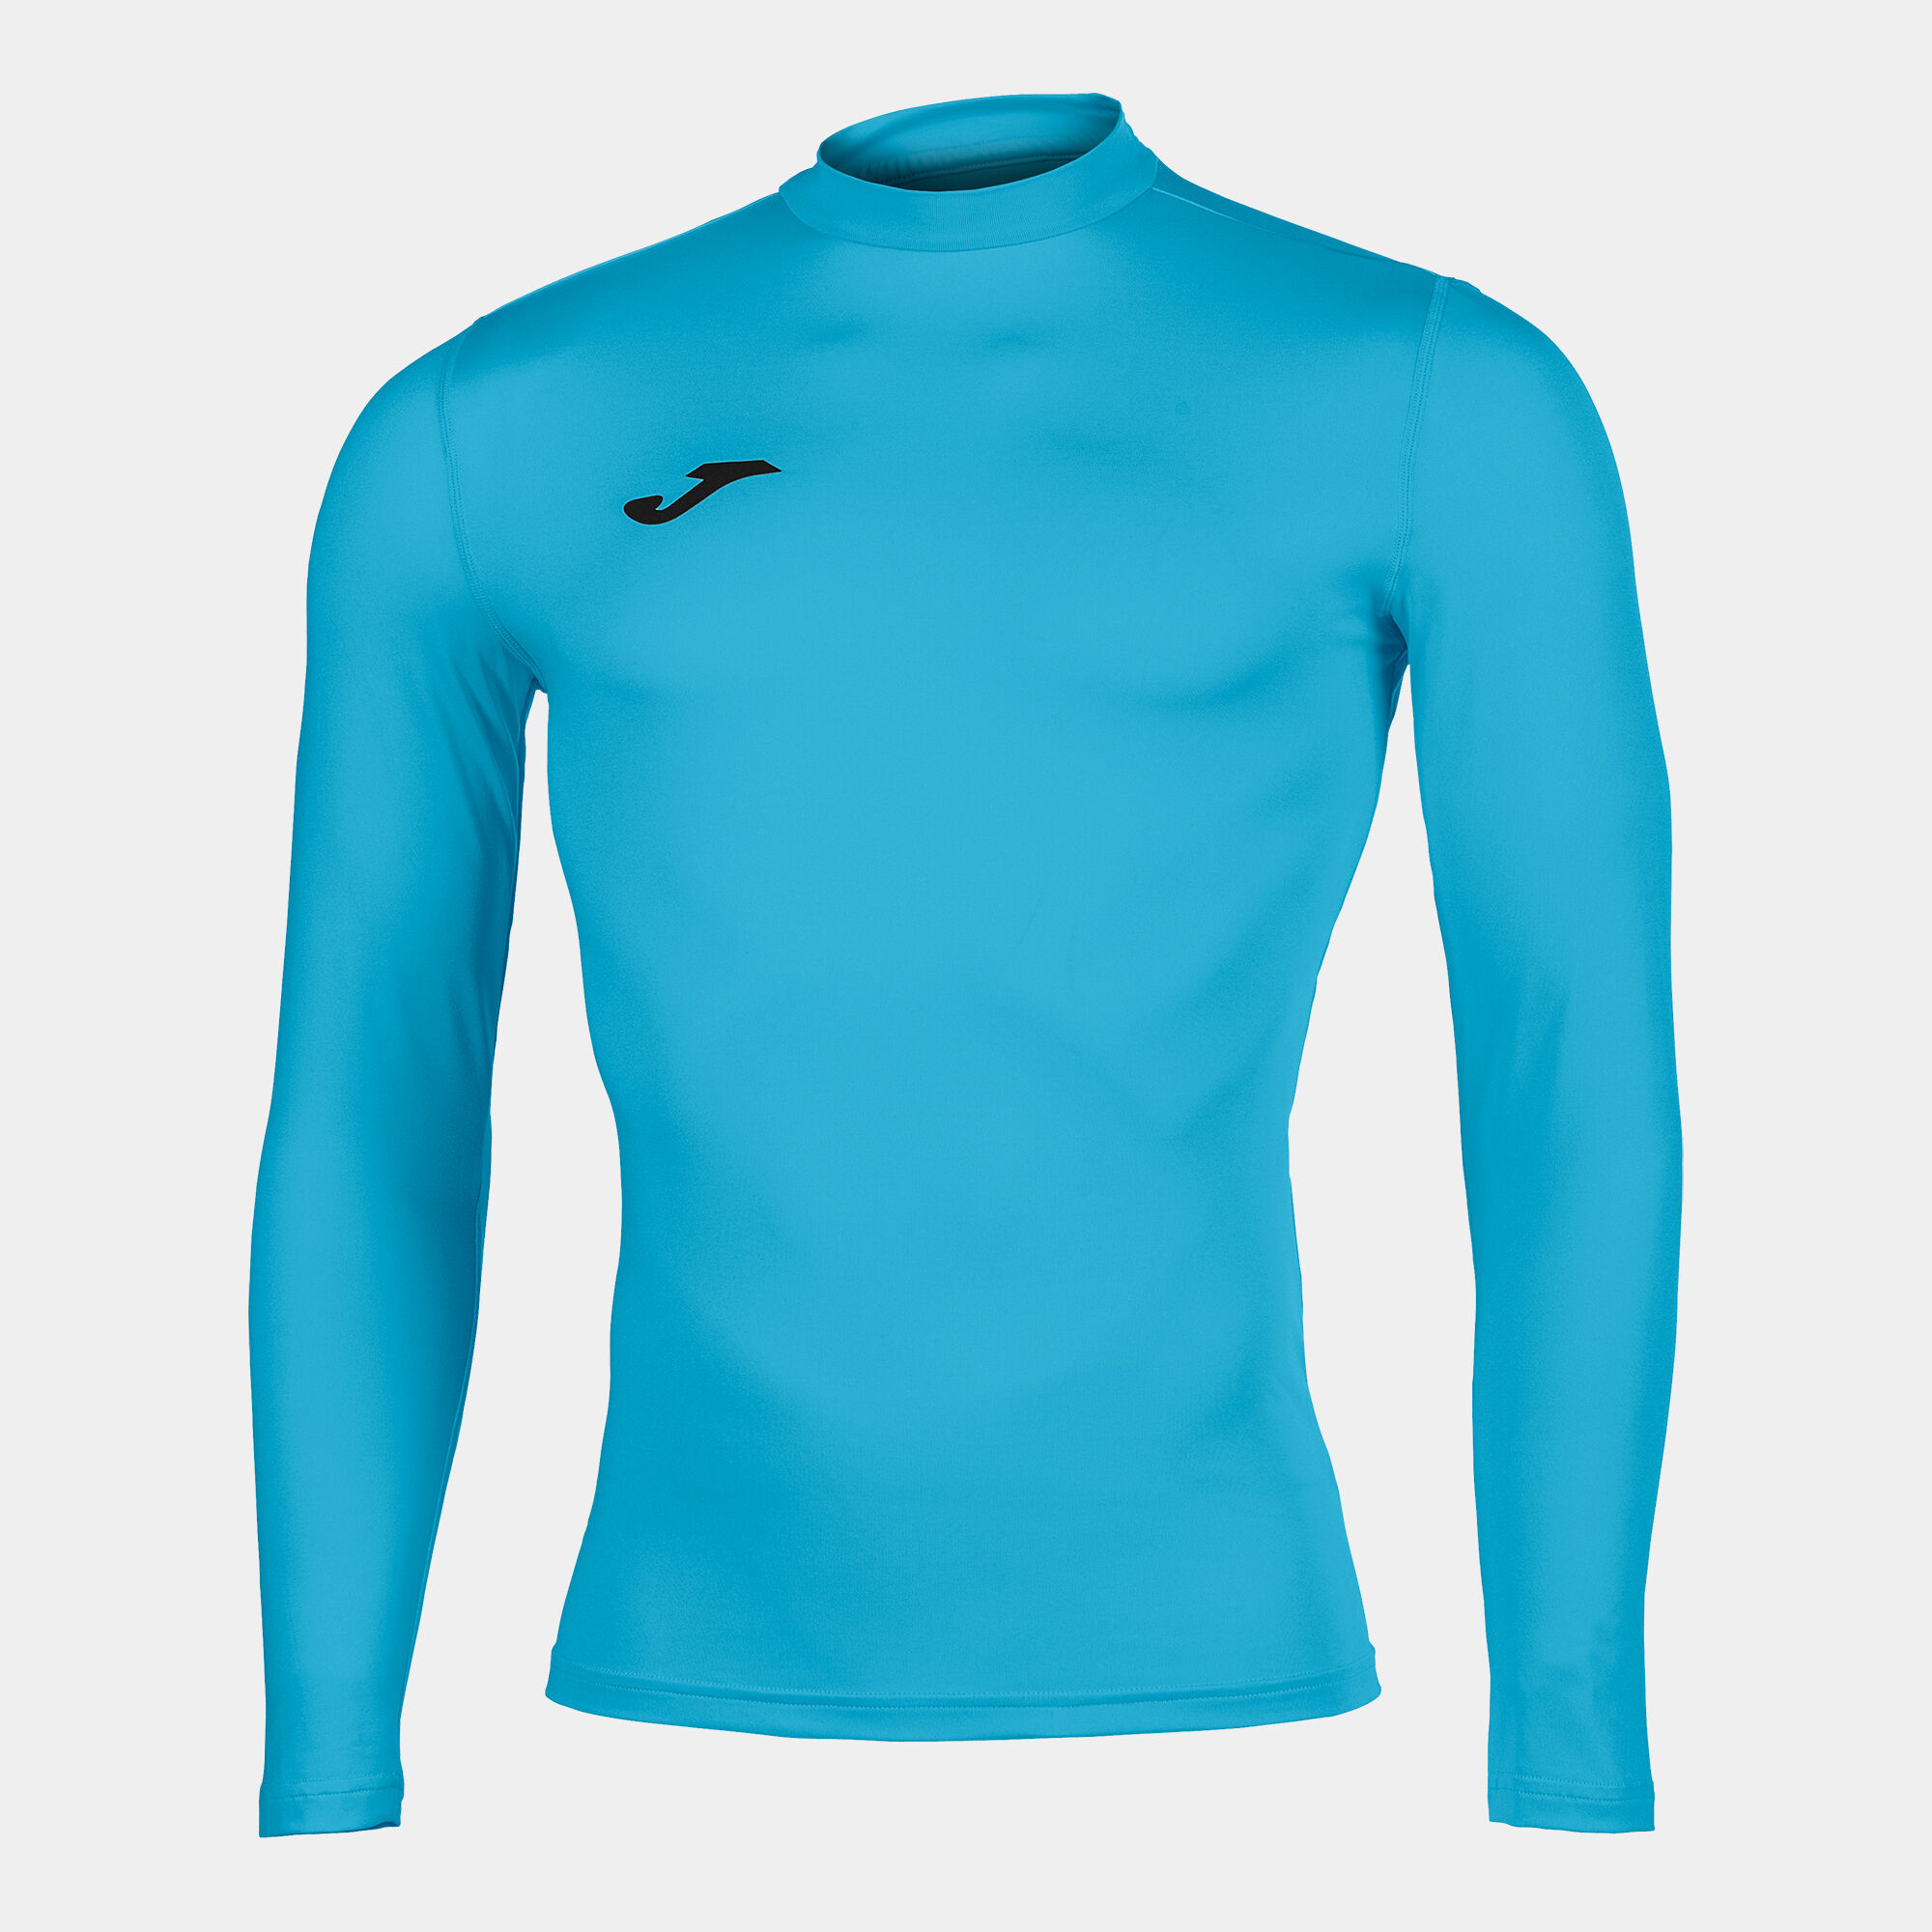 MAILLOT MANCHES LONGUES UNISEXE BRAMA ACADEMY TURQUOISE FLUO